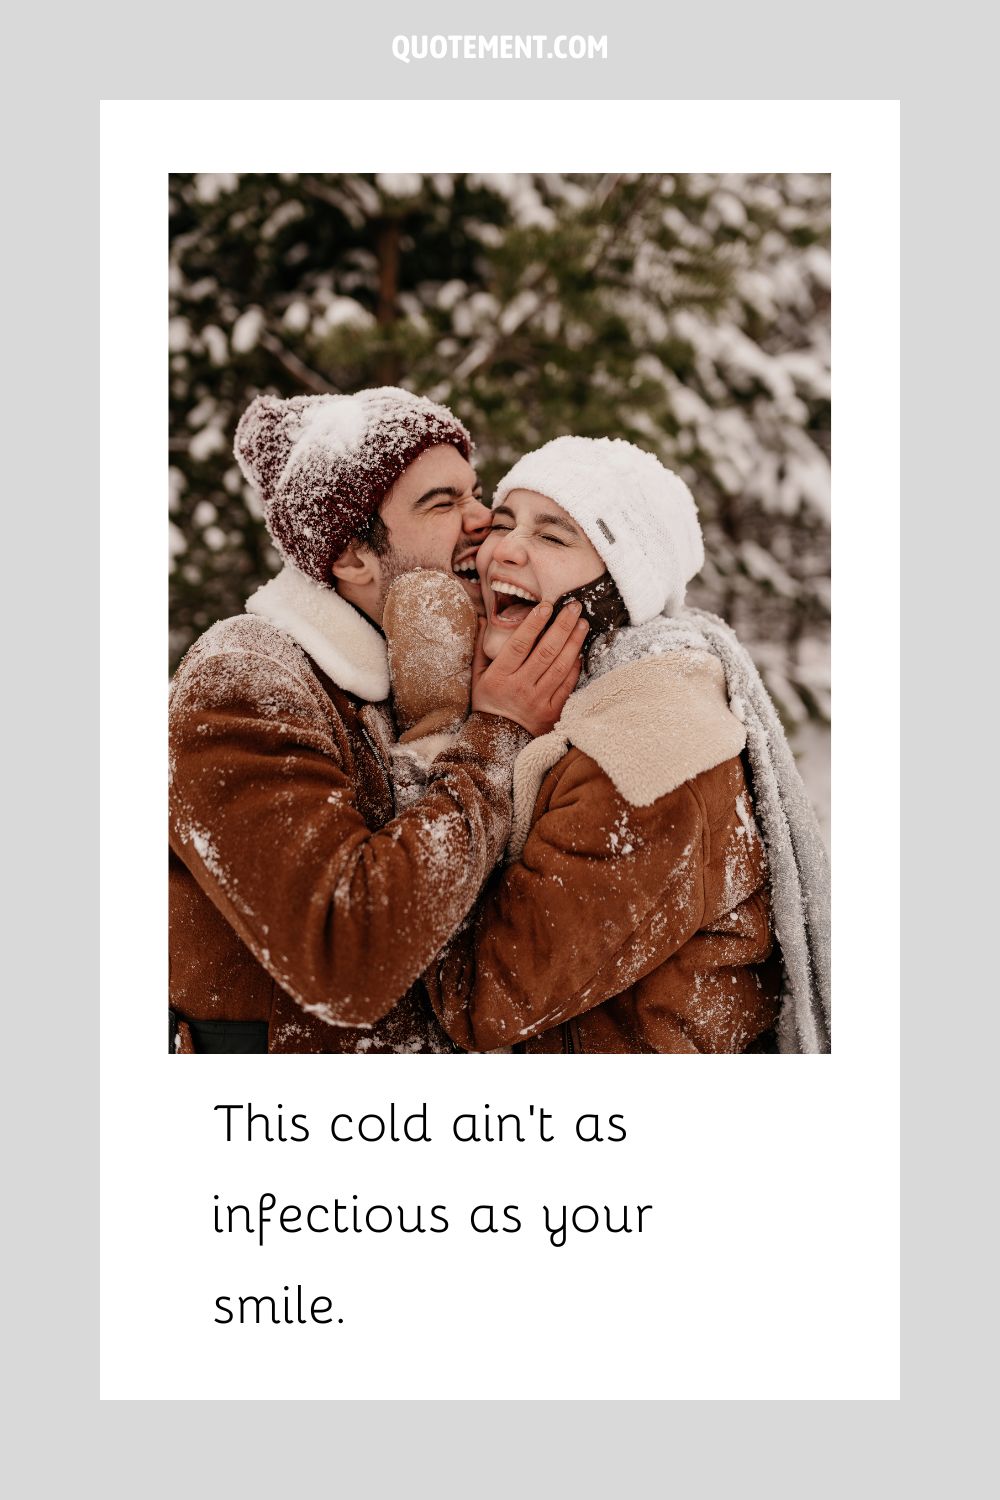 a couple grins with happiness while sharing a loving embrace in a snowy scene